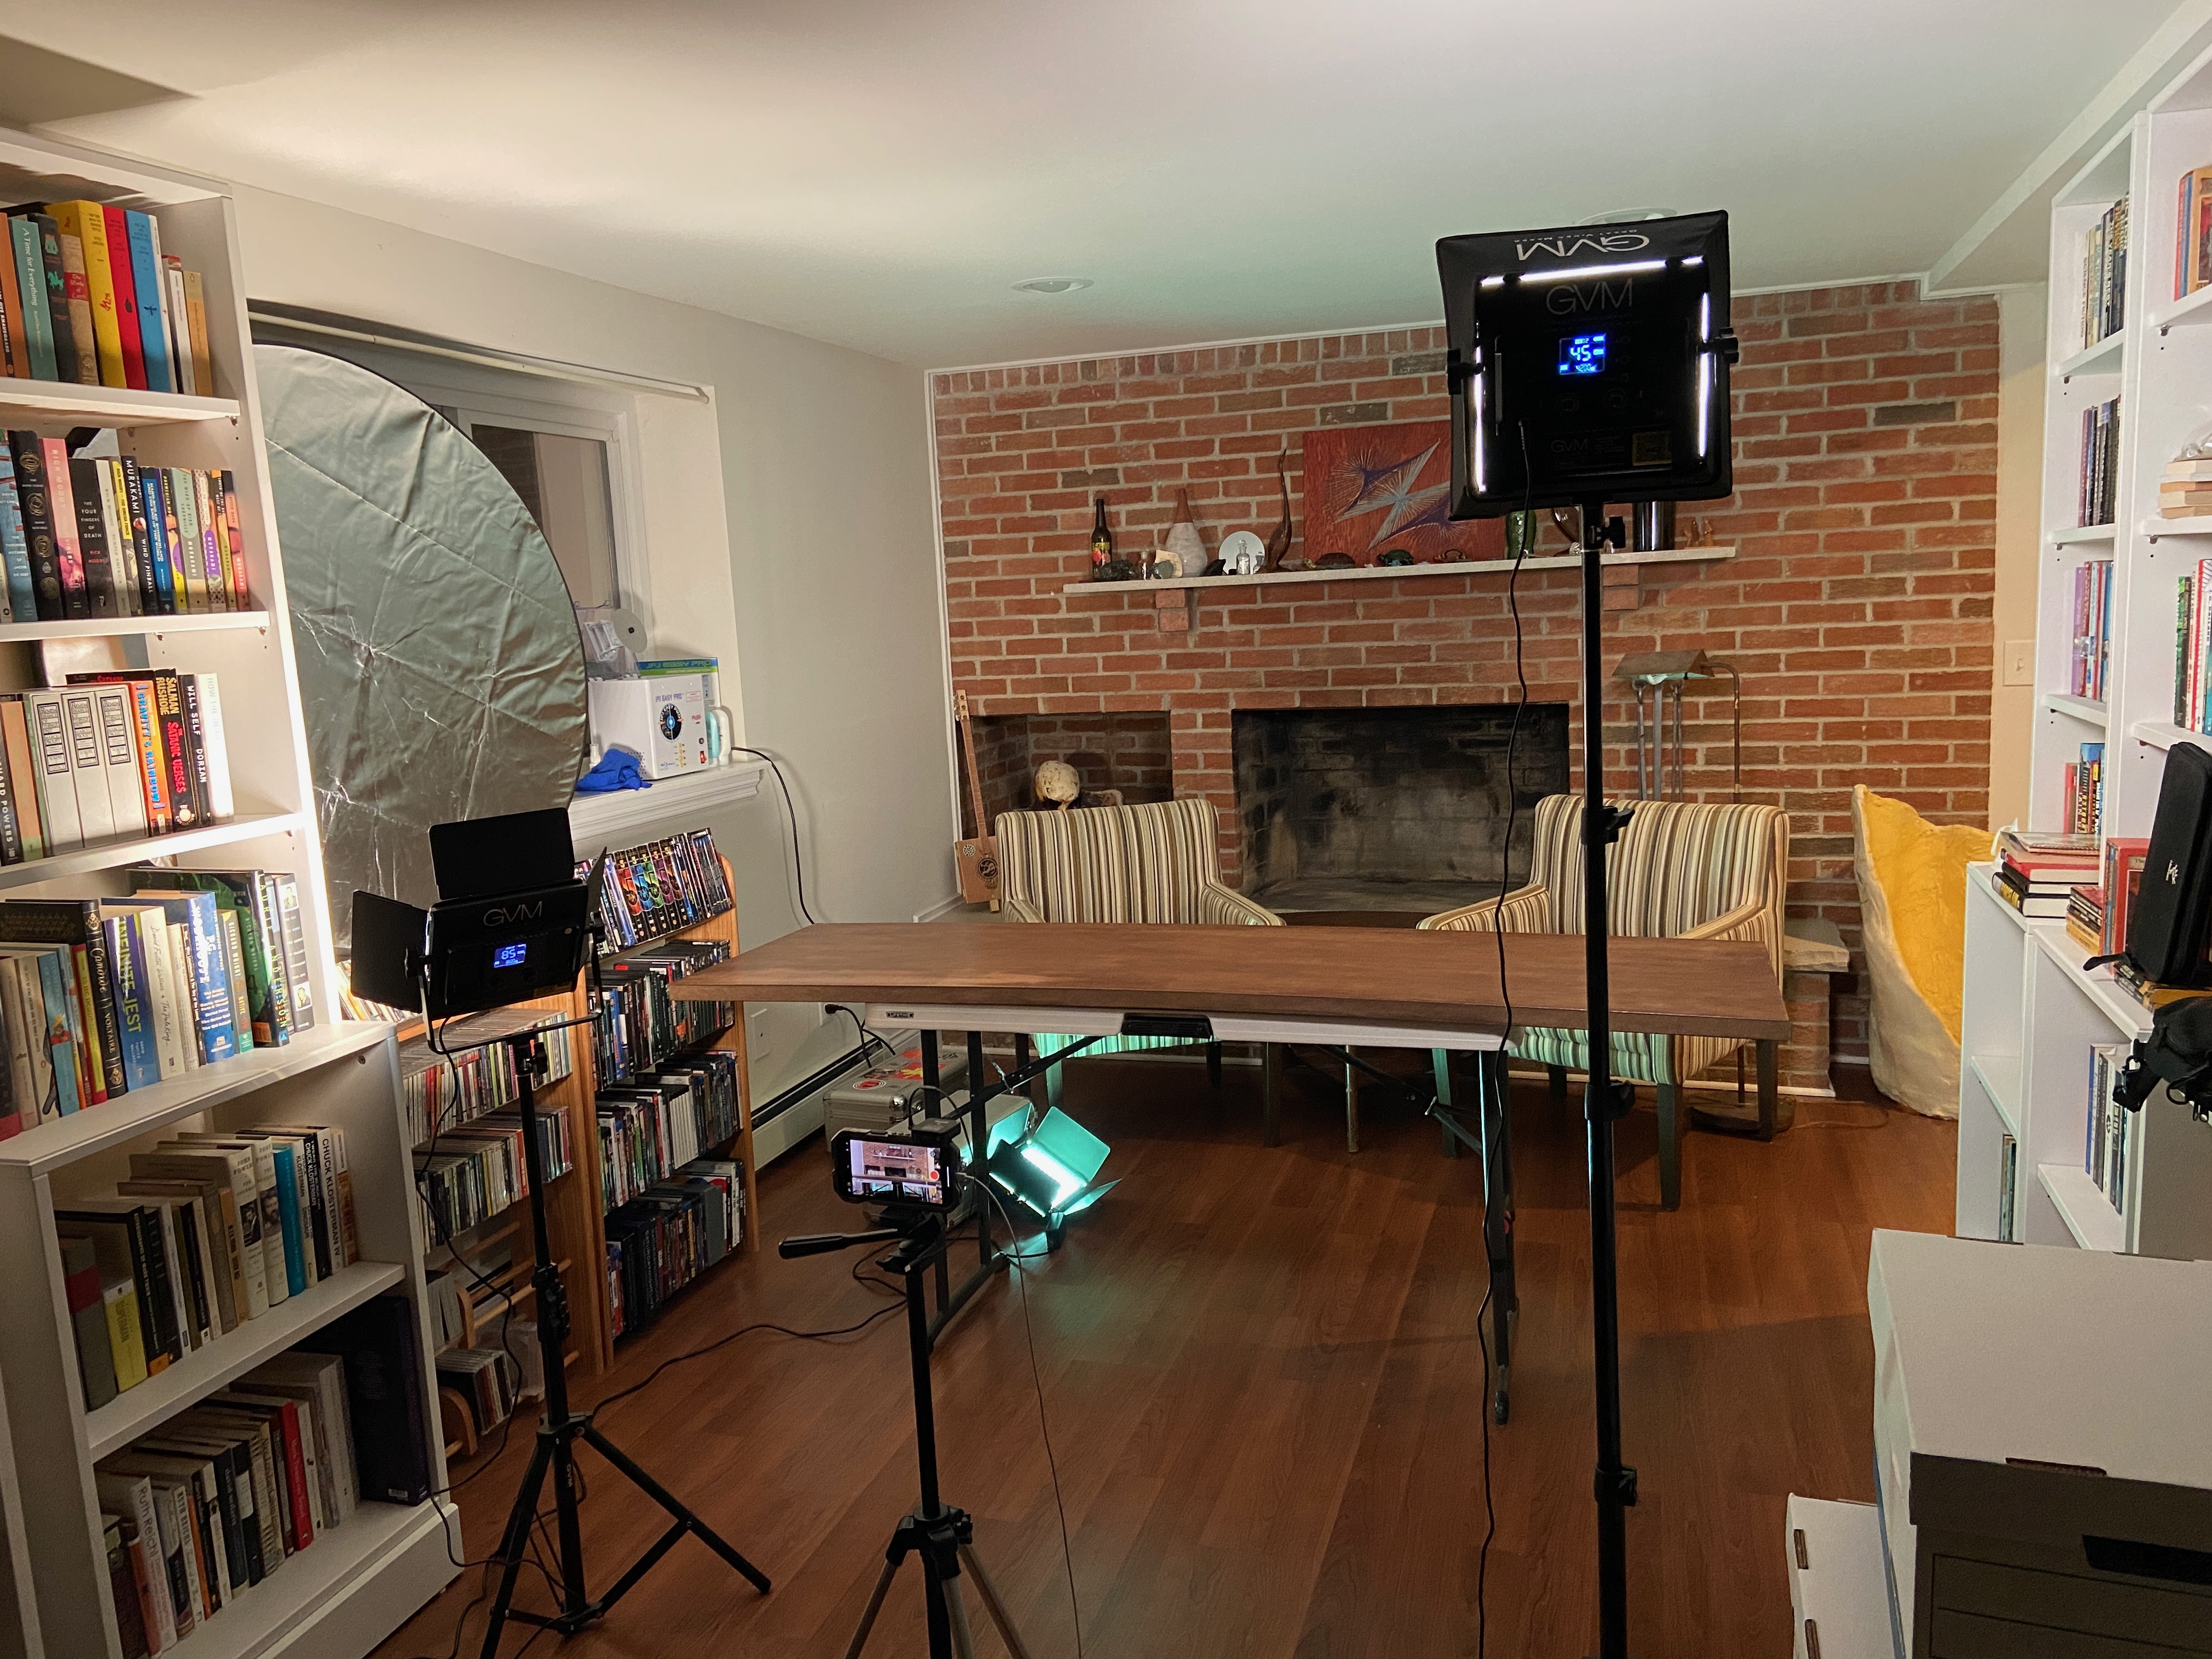 a fireplace with a table in front of it, and tripod-mounted lighting gear